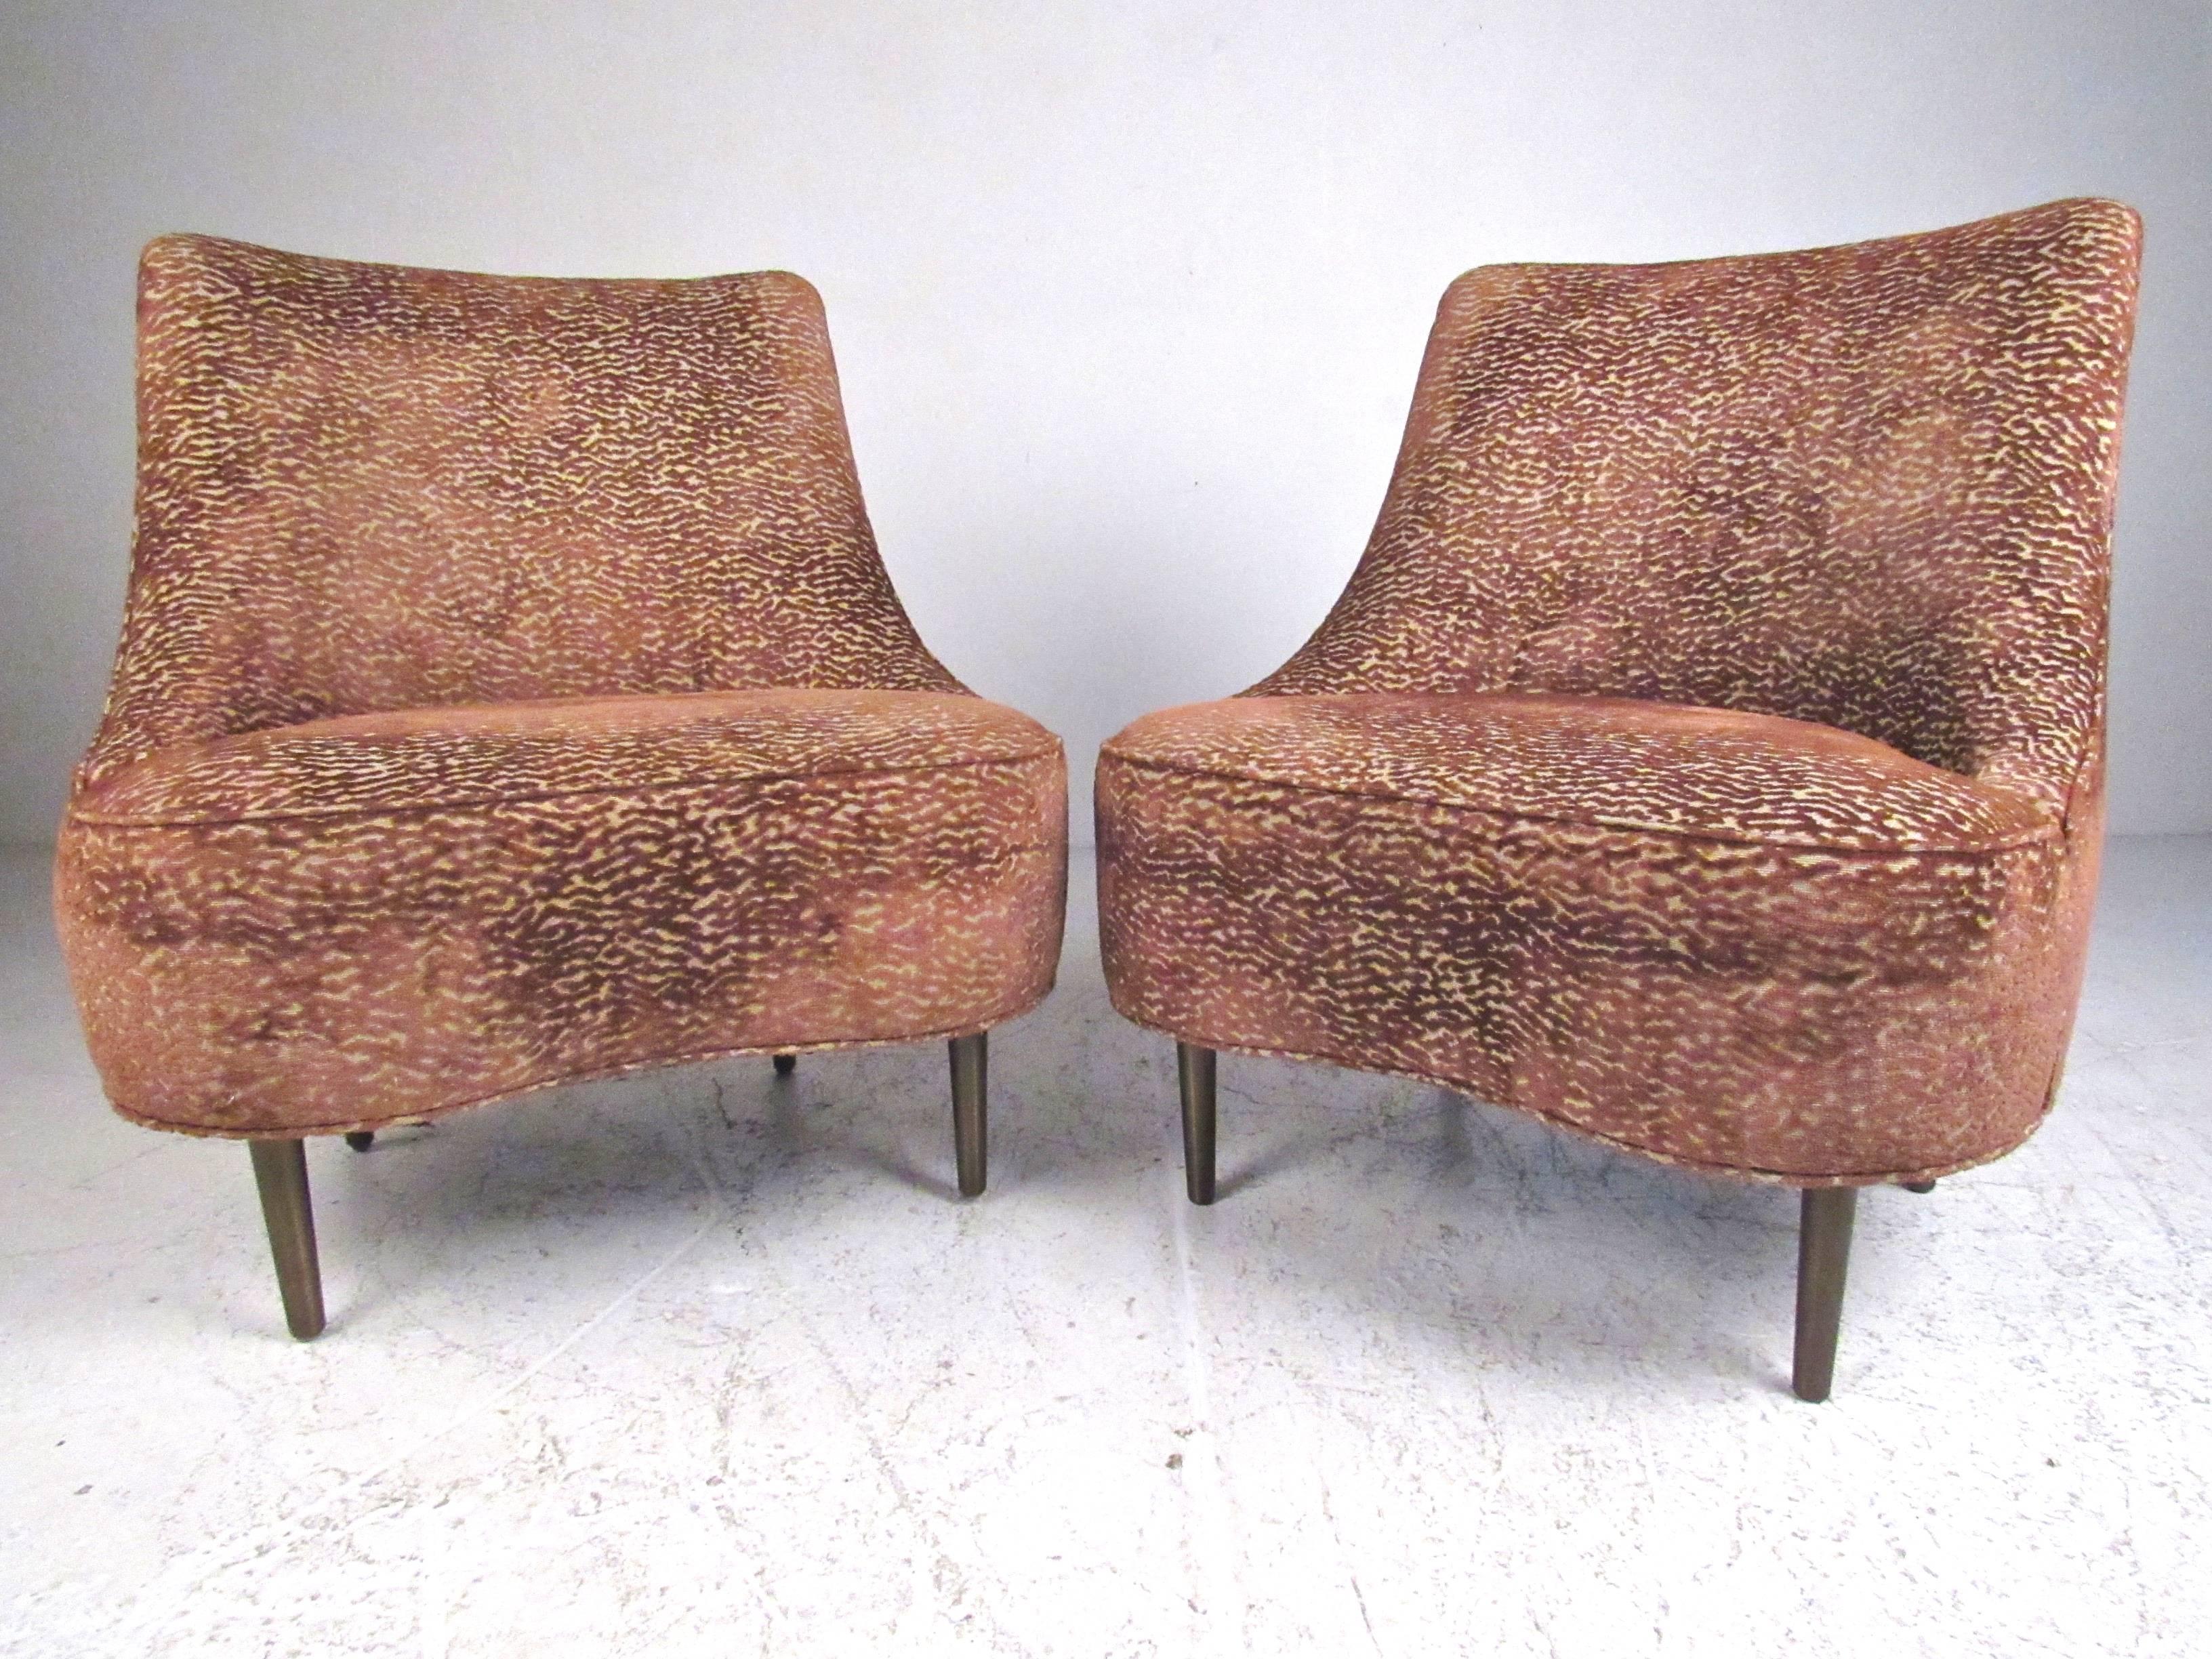 This stylish pair of Mid-Century Modern lounge chairs feature stylish slipper design by iconic designer Edward Wormley for Dunbar. Bronze finish metal legs make a unique statement while the shapely upholstered seat backs make for a comfortable